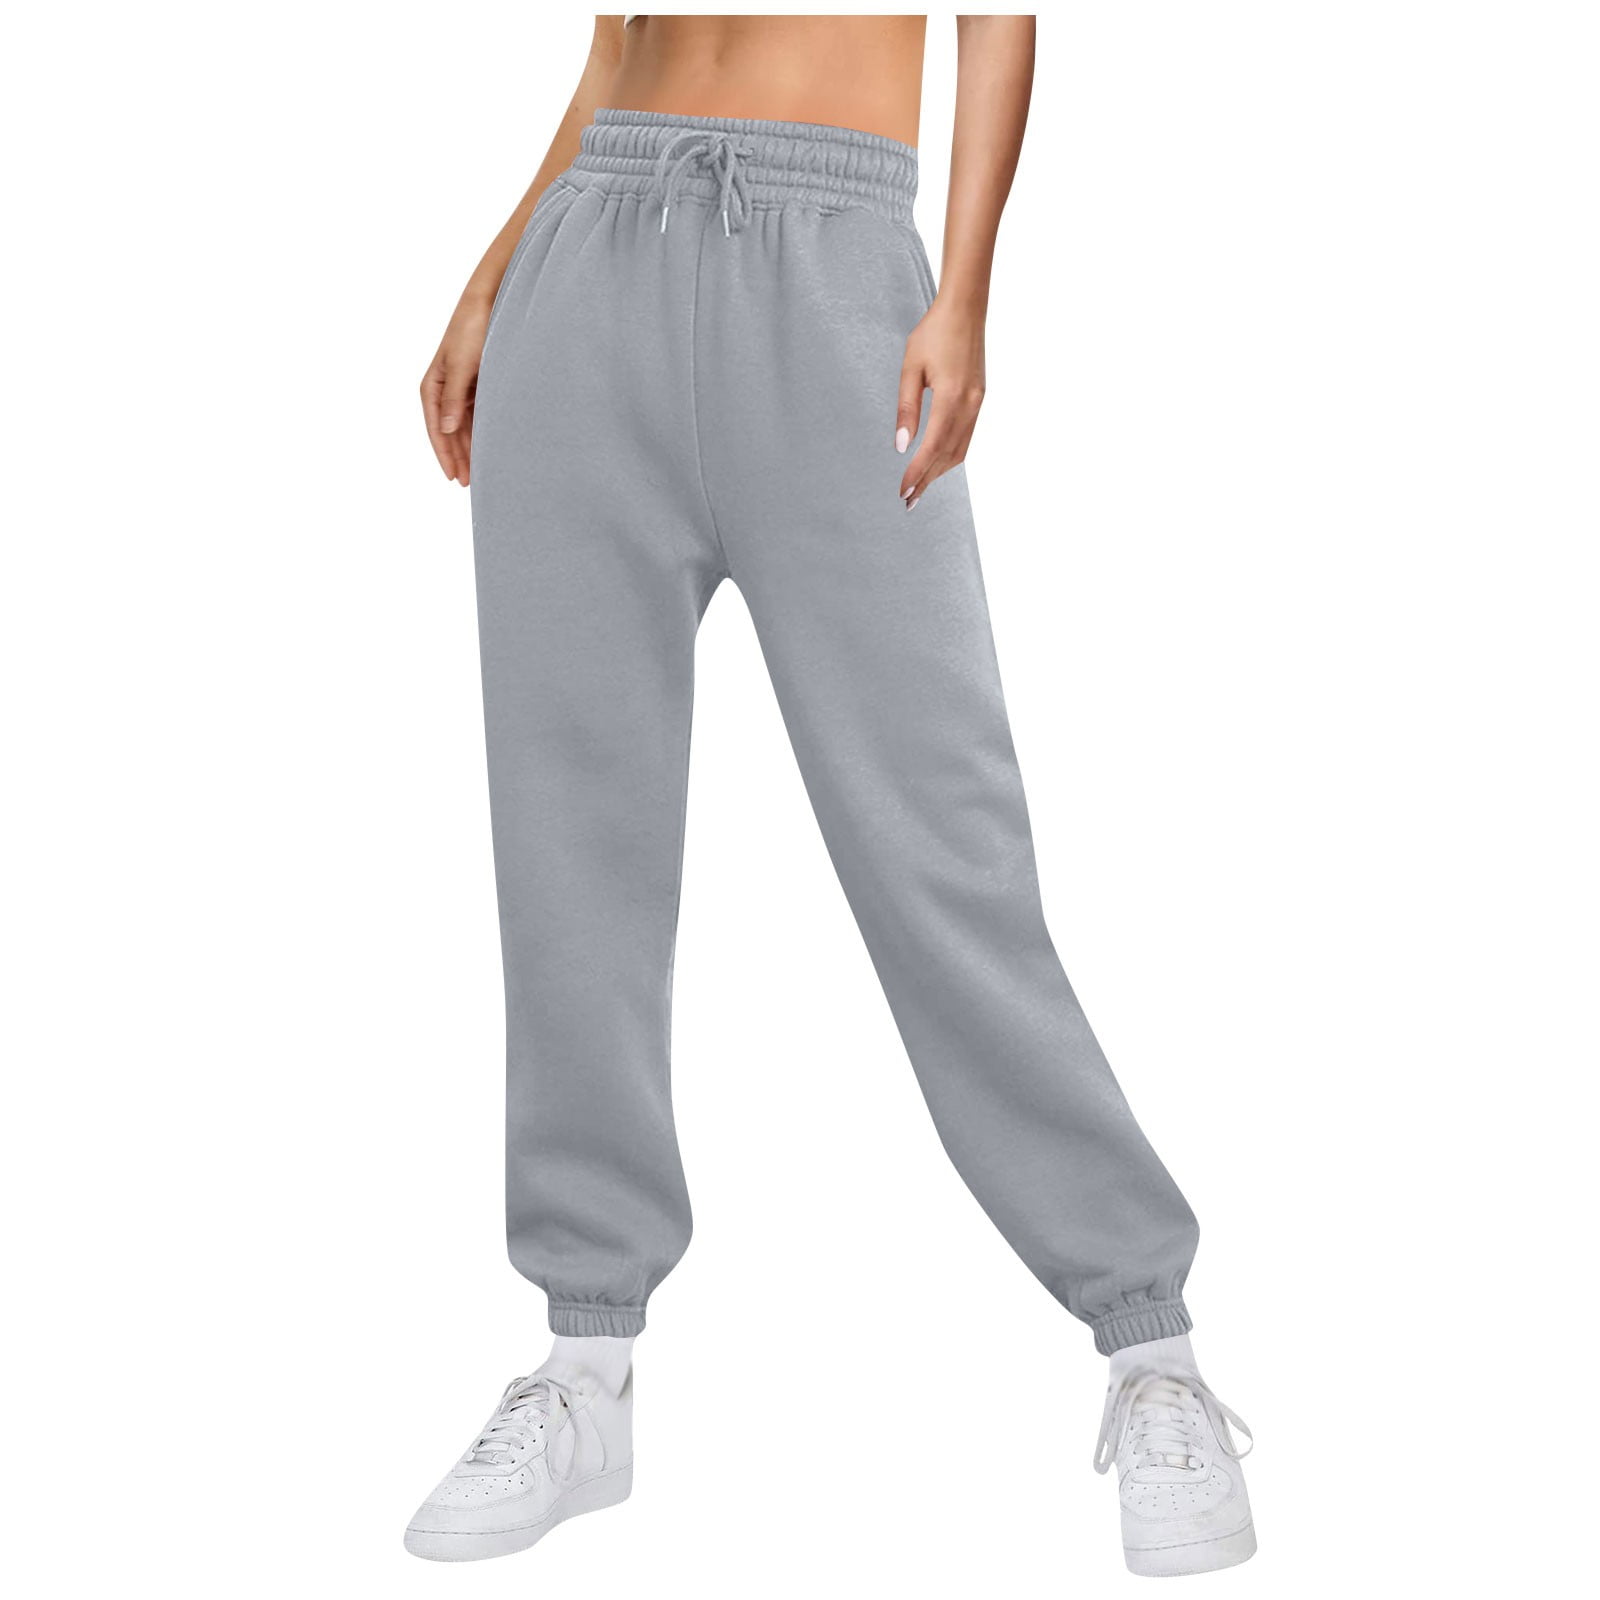 Susanny Tall Sweatpants for Women Drawstring Straight Leg with